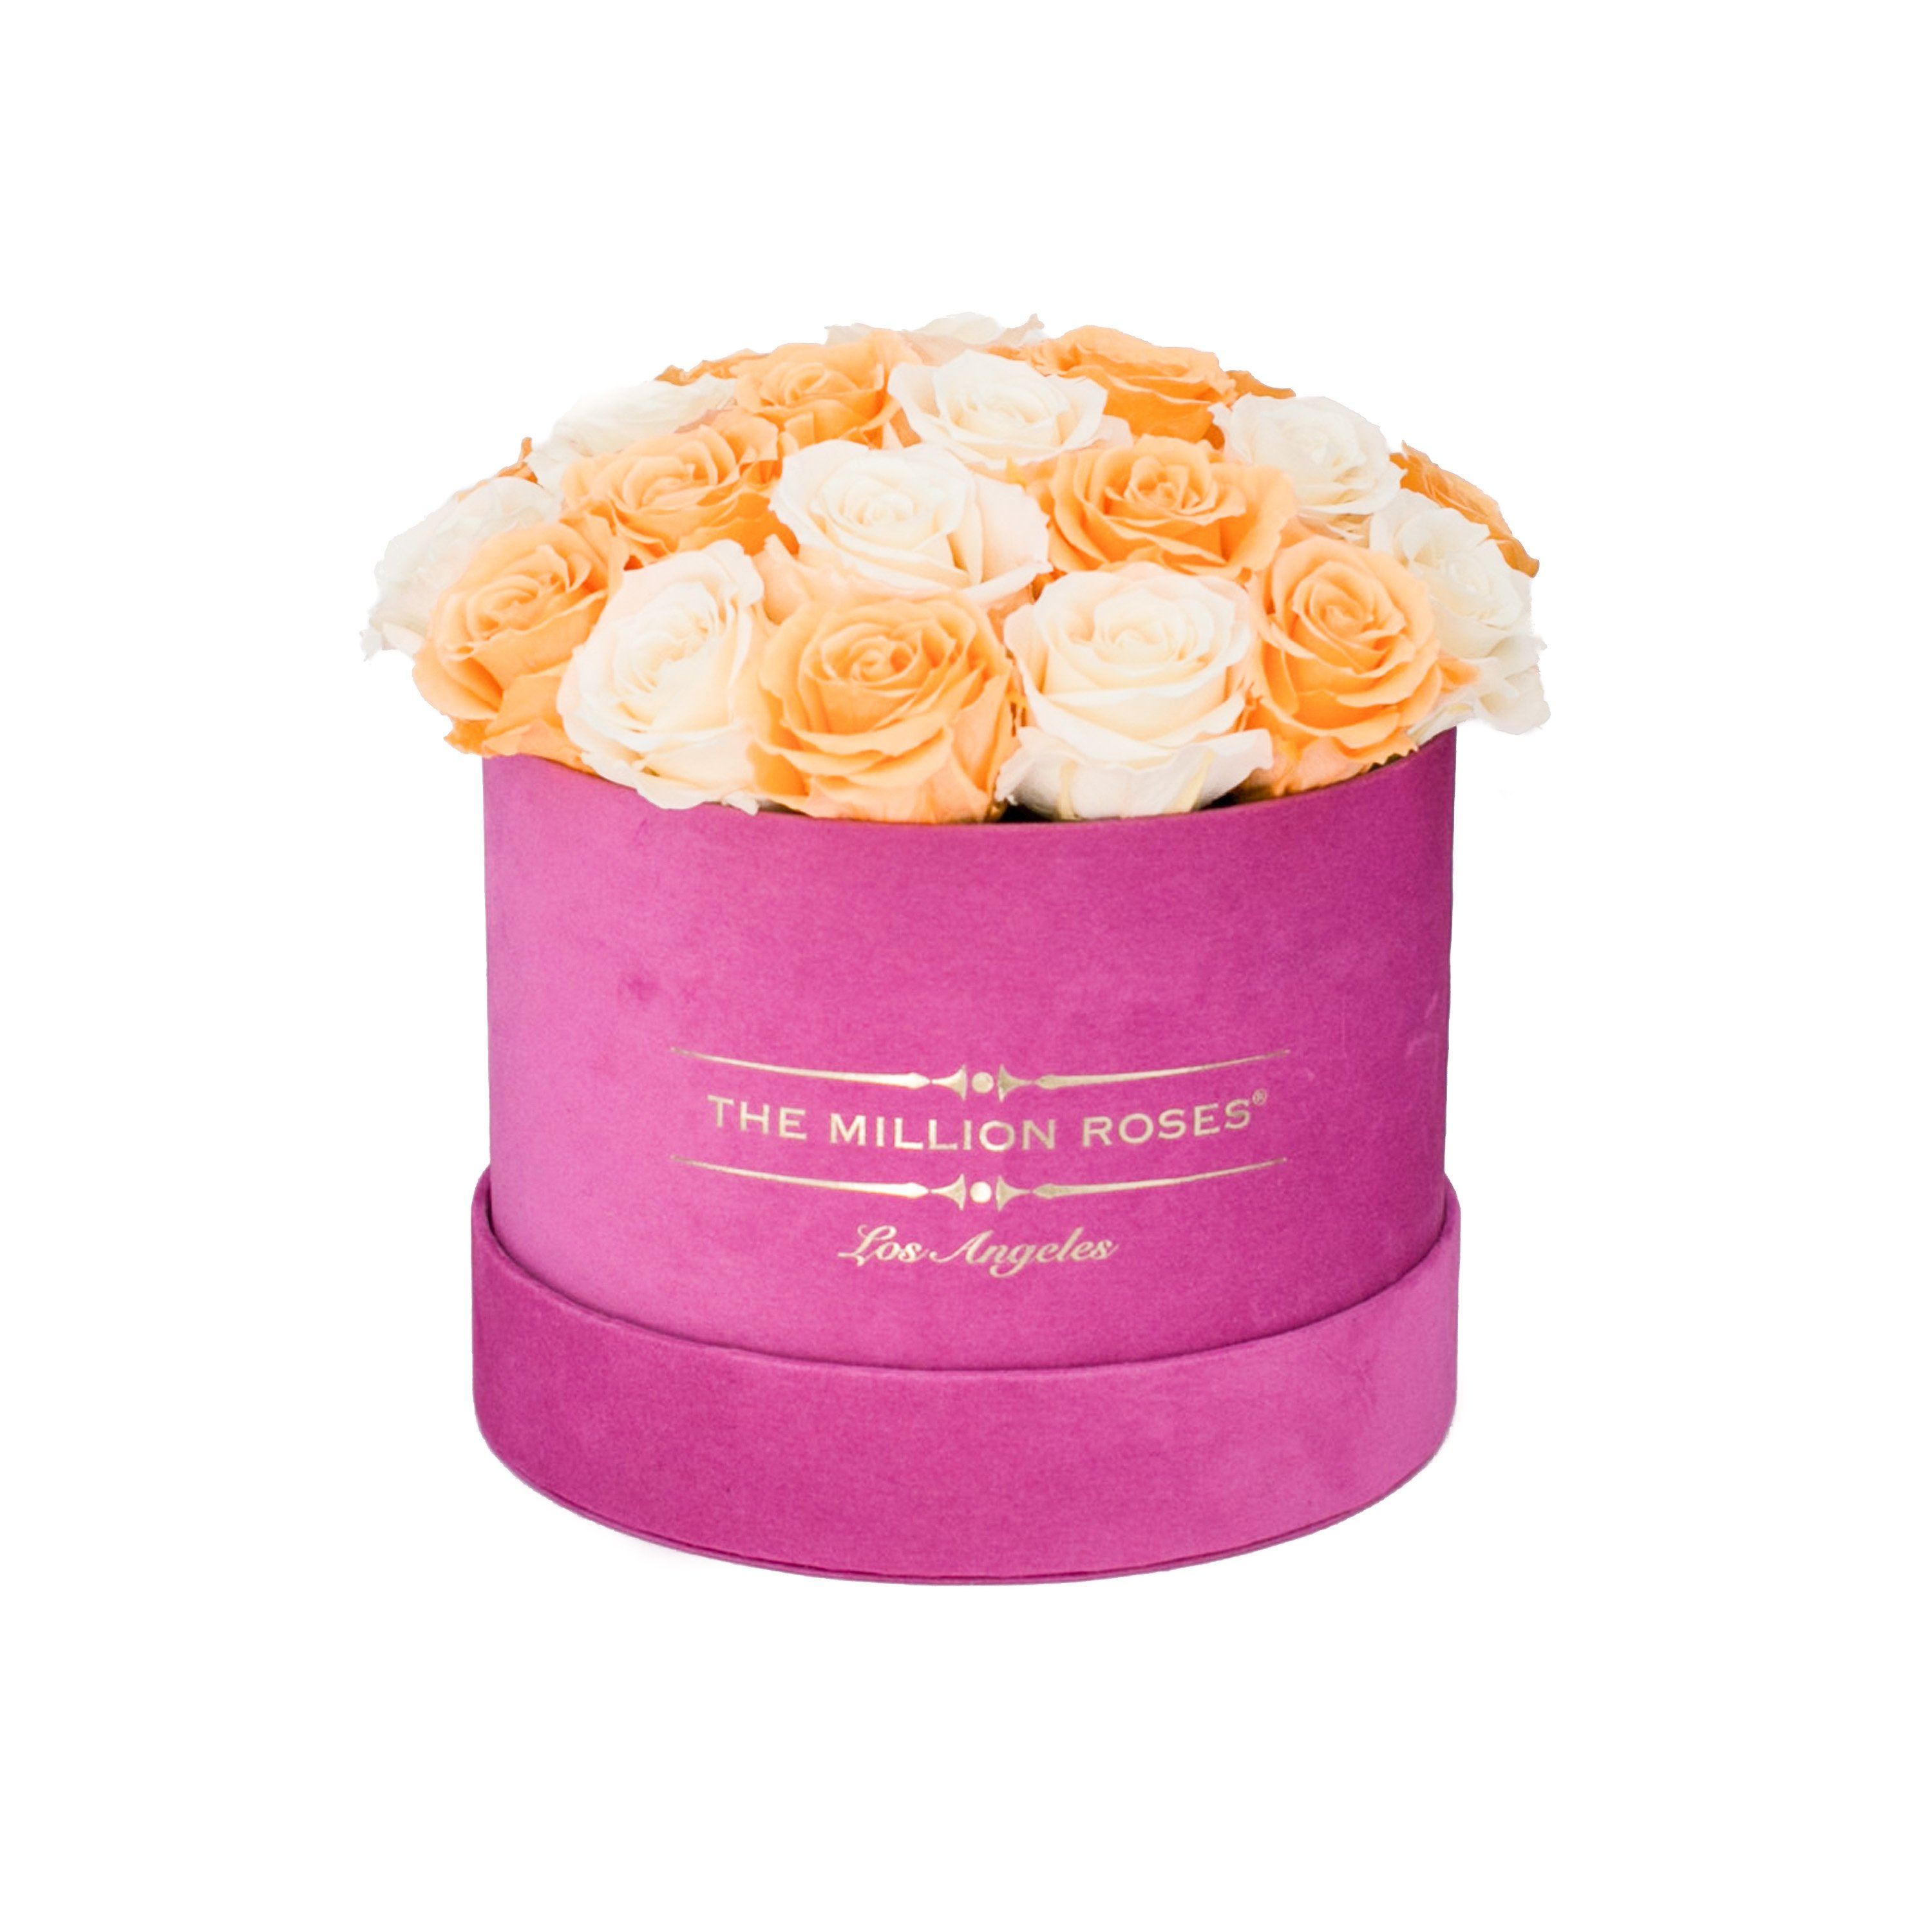 classic round box - hot-pink suede box - apricot/ivory roses ( dome ) apricot eternity roses - the million roses